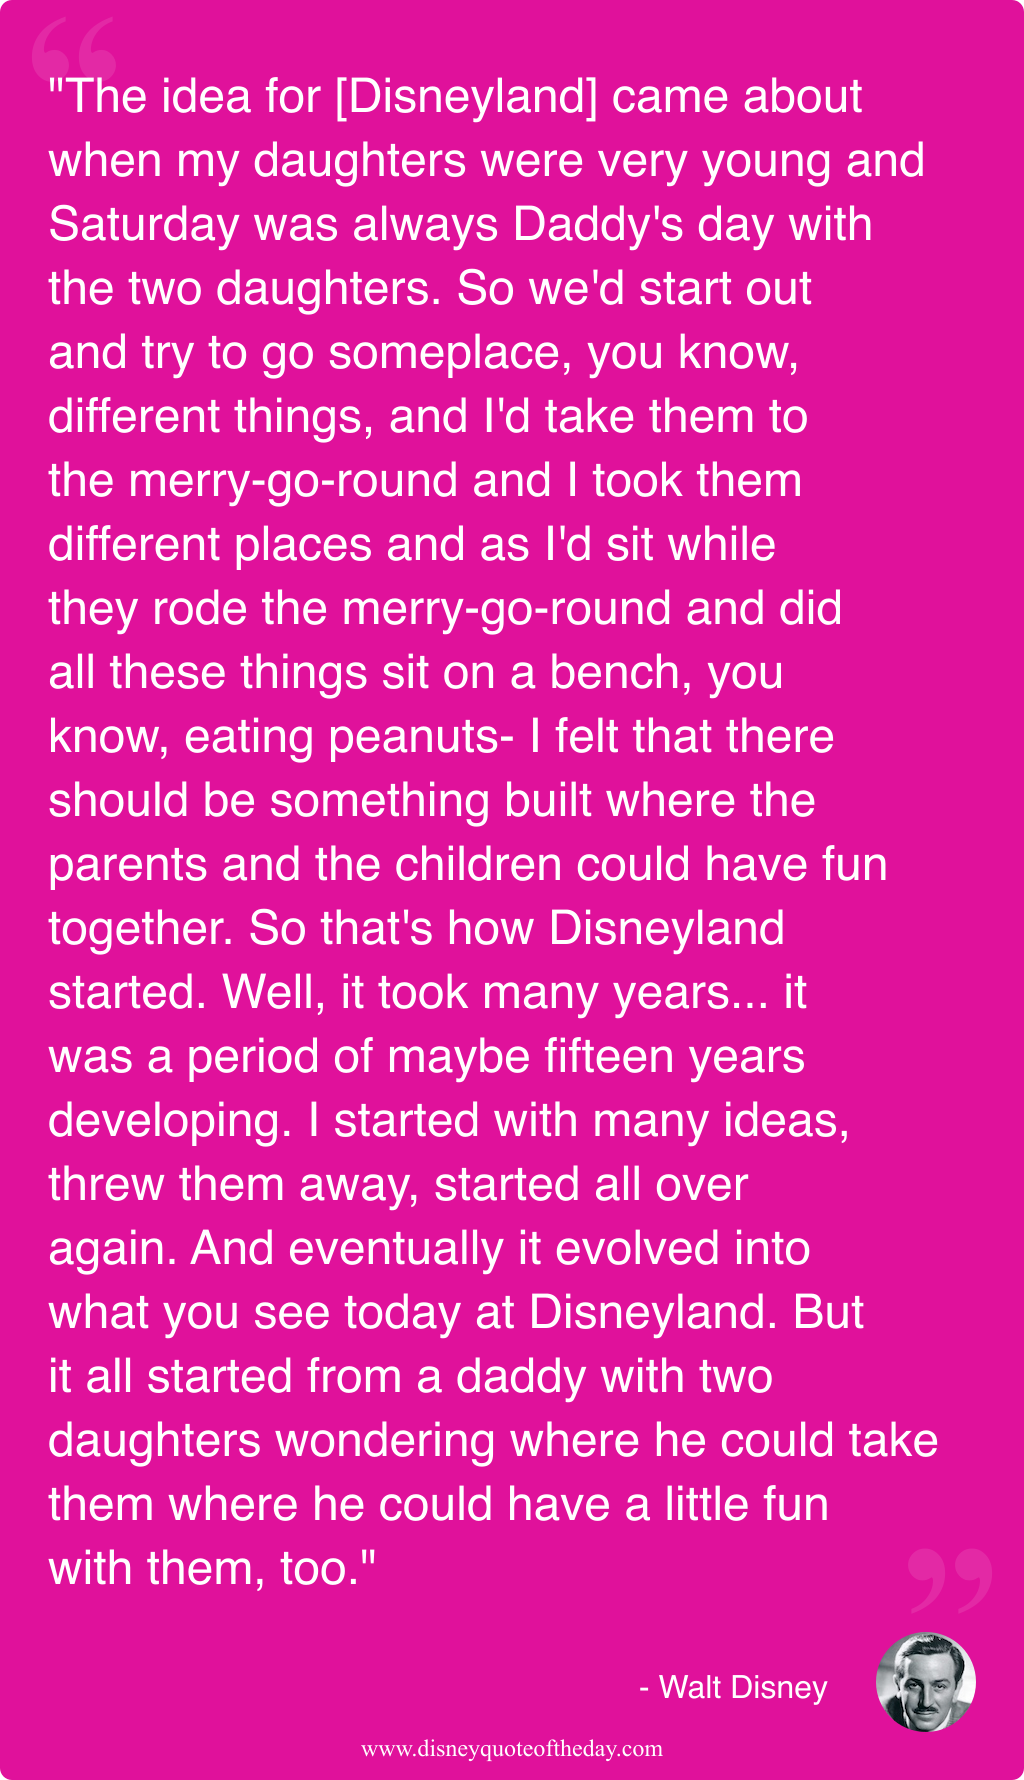 Quote by Walt Disney, "The idea for [Disneyland] came..."